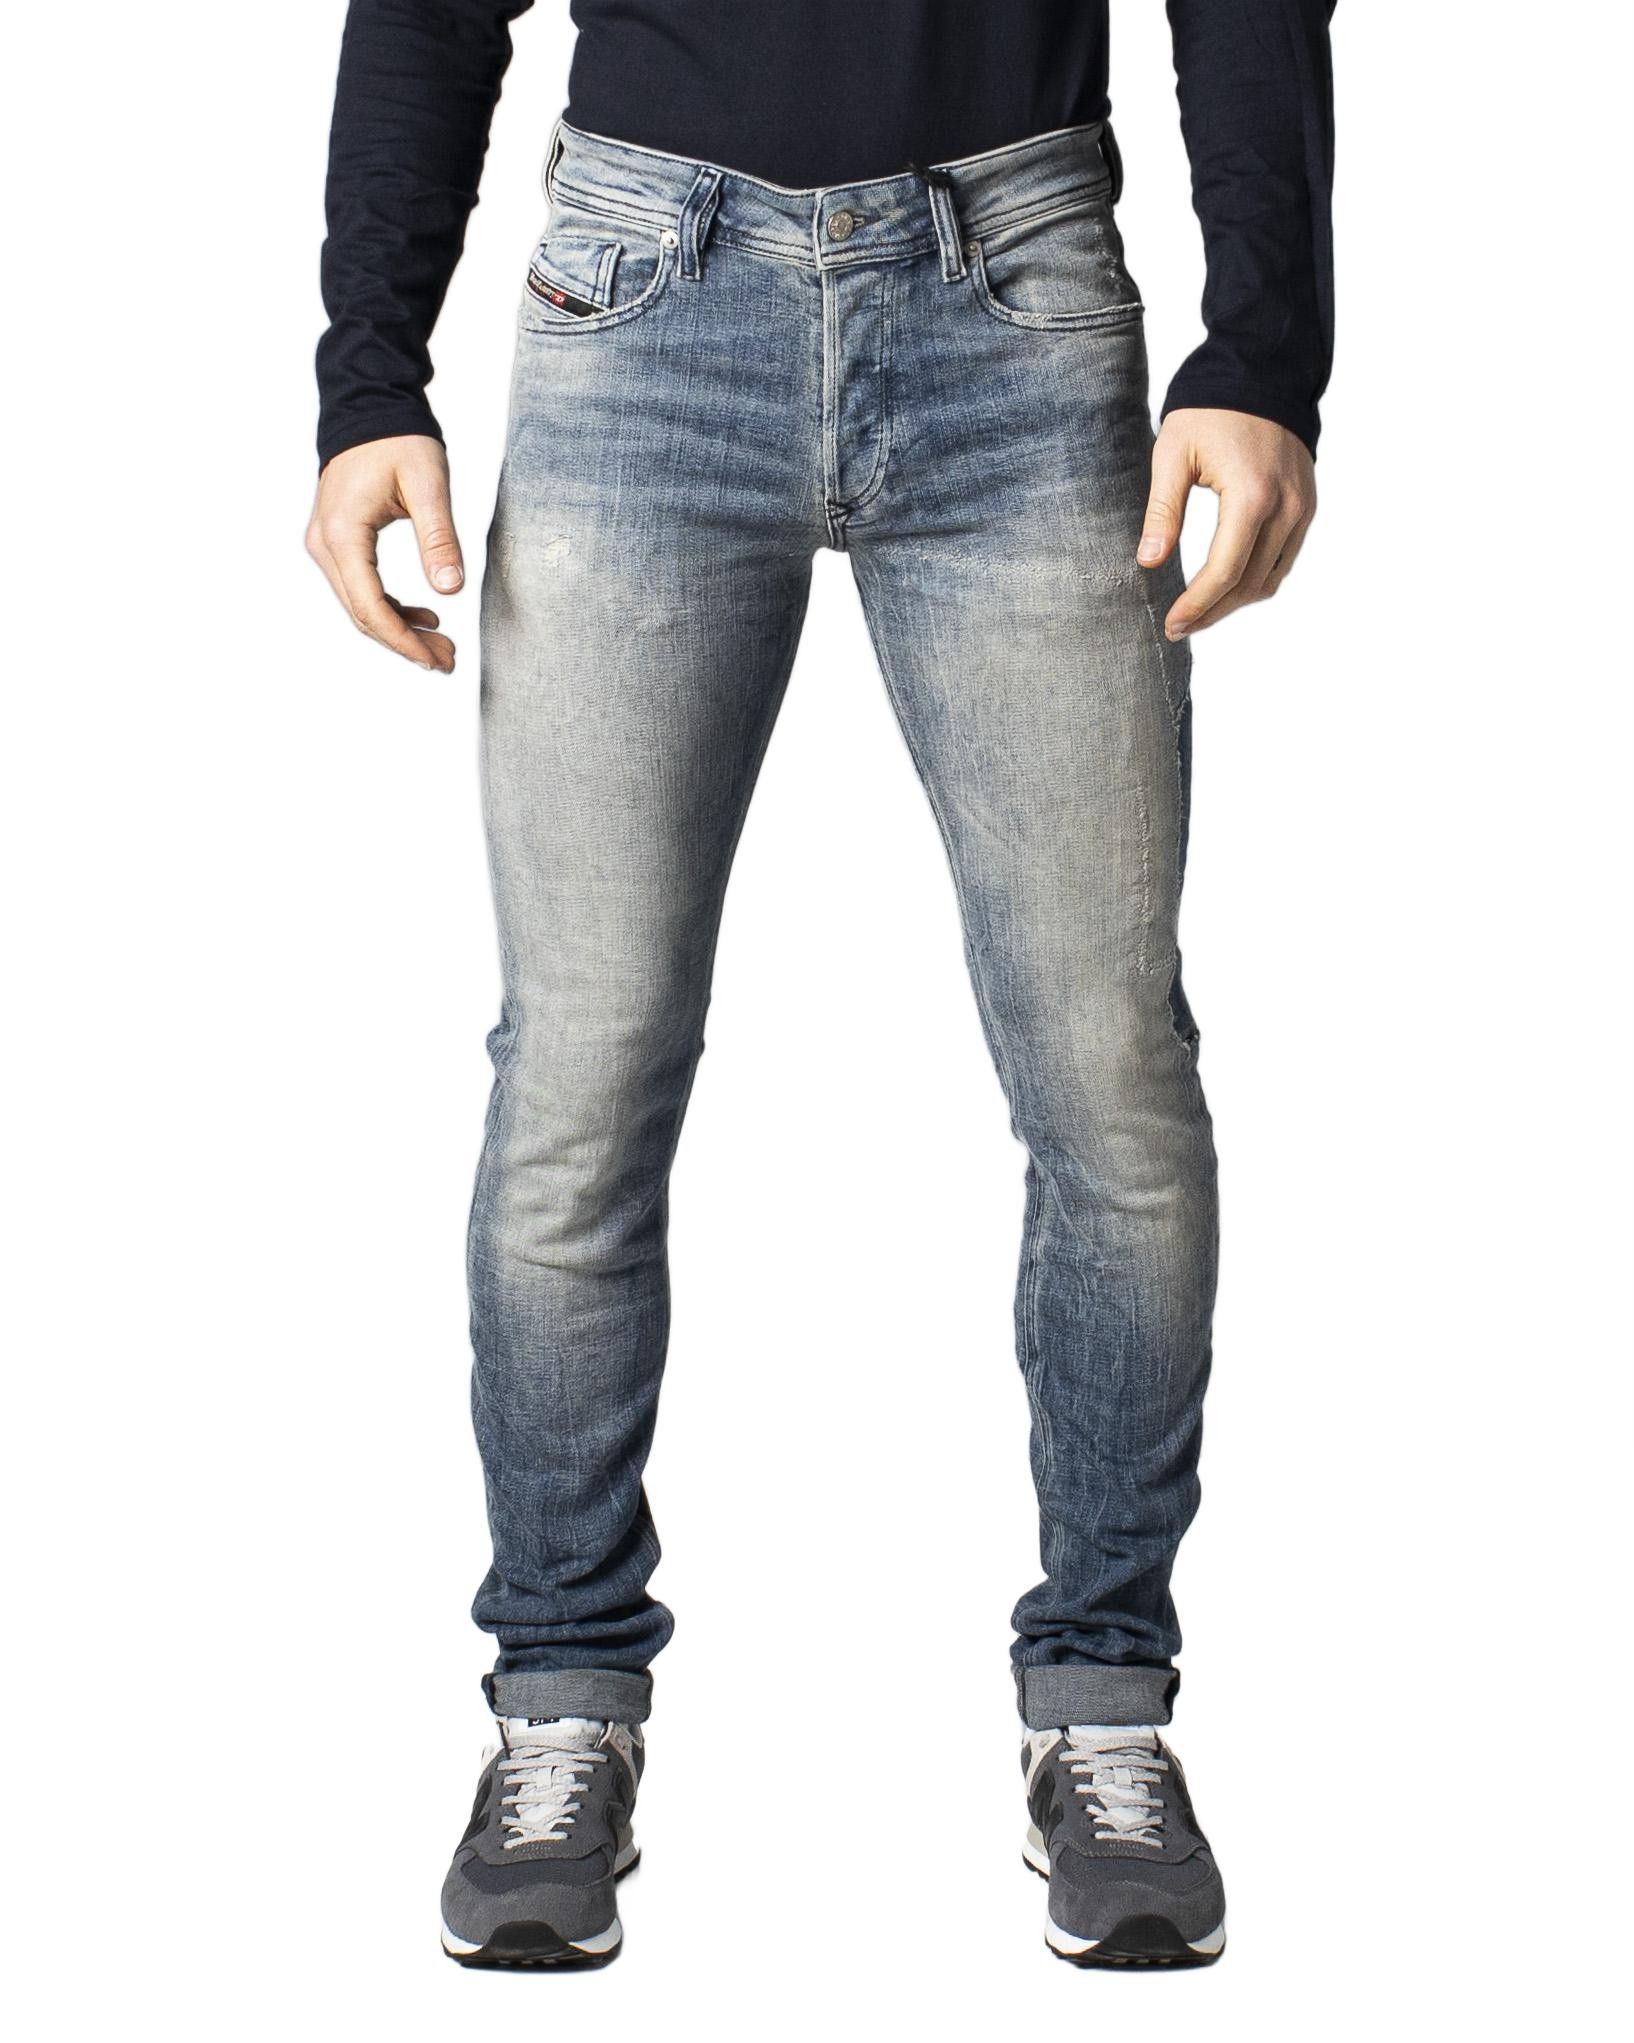 Brand: Diesel   Gender: Men   Type: Jeans   Color: Blue   Fastening: Zip and Button   Pockets: Front and Back Pockets   Season: Spring/summer